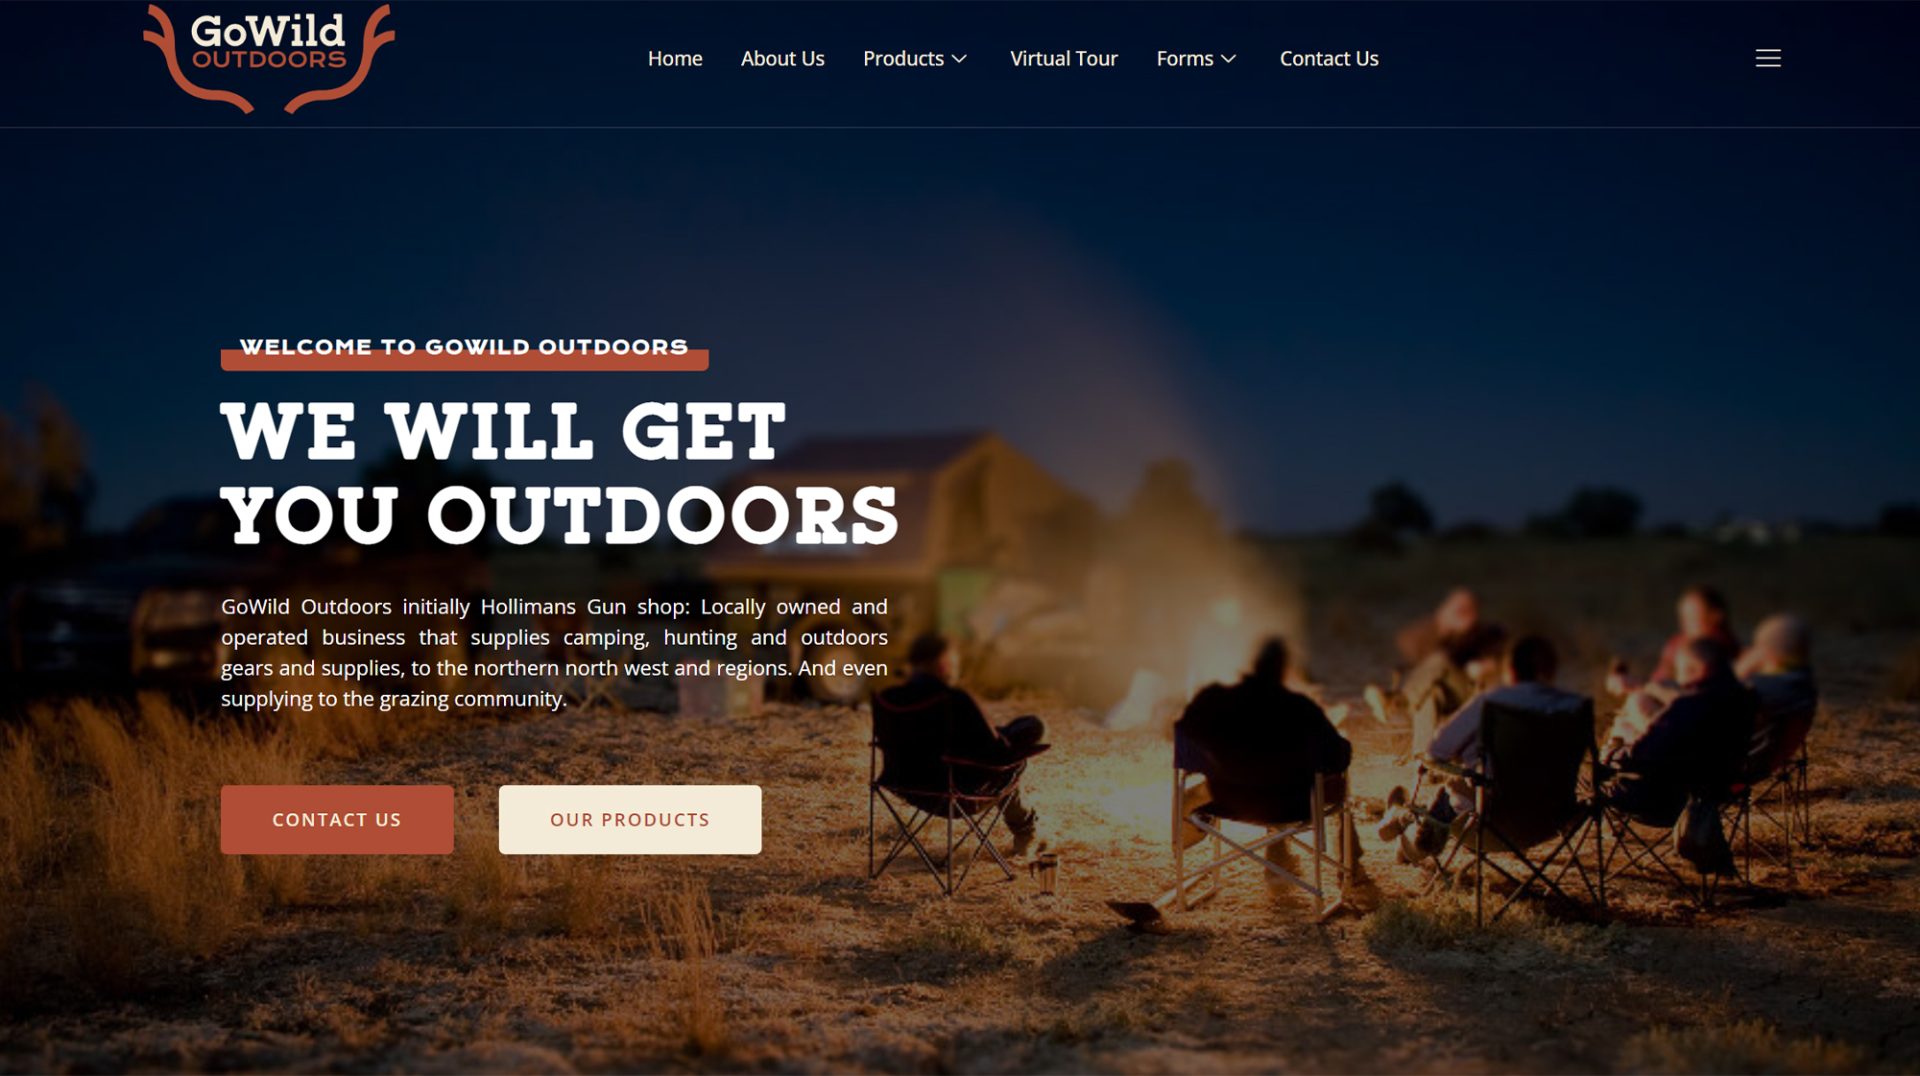 GoWild Outdoors